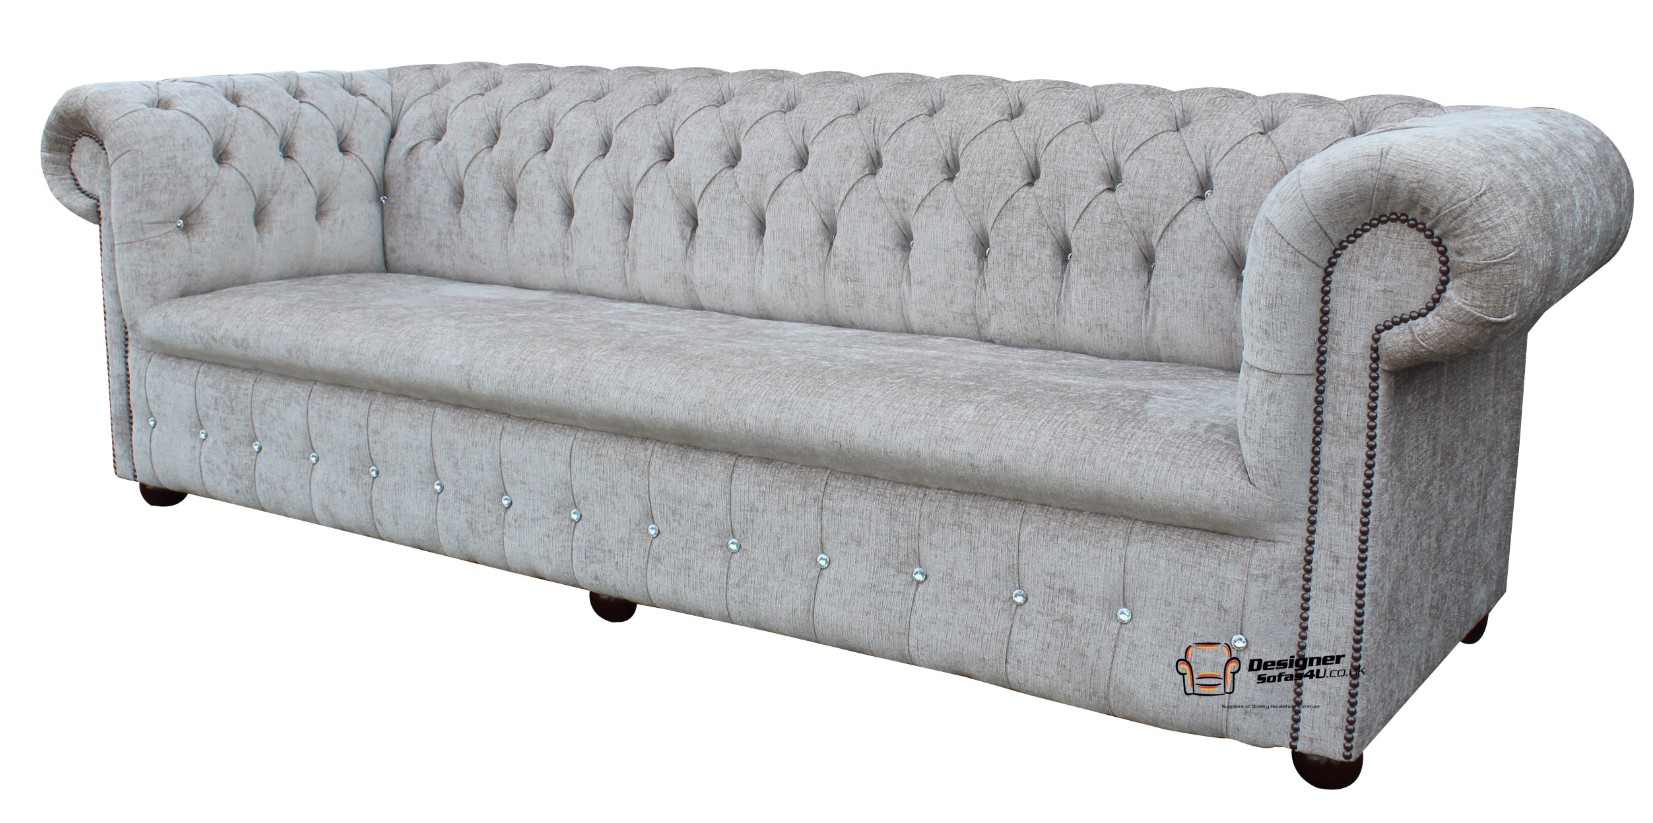 Grey Chesterfield Sofa England  %Post Title